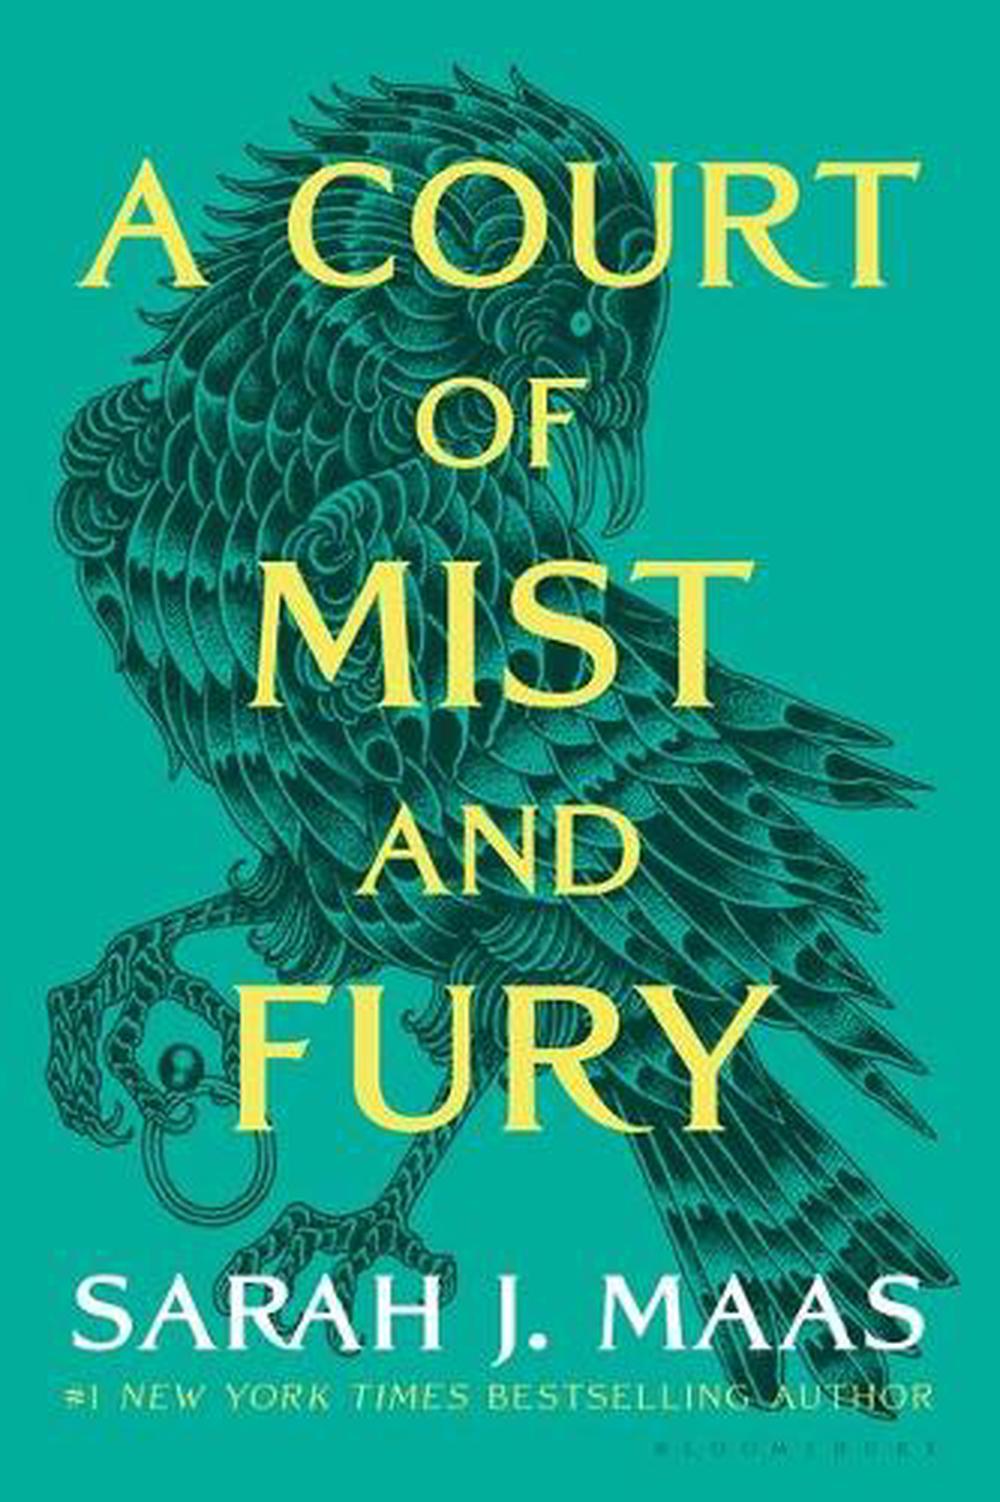 book a court of mist and fury